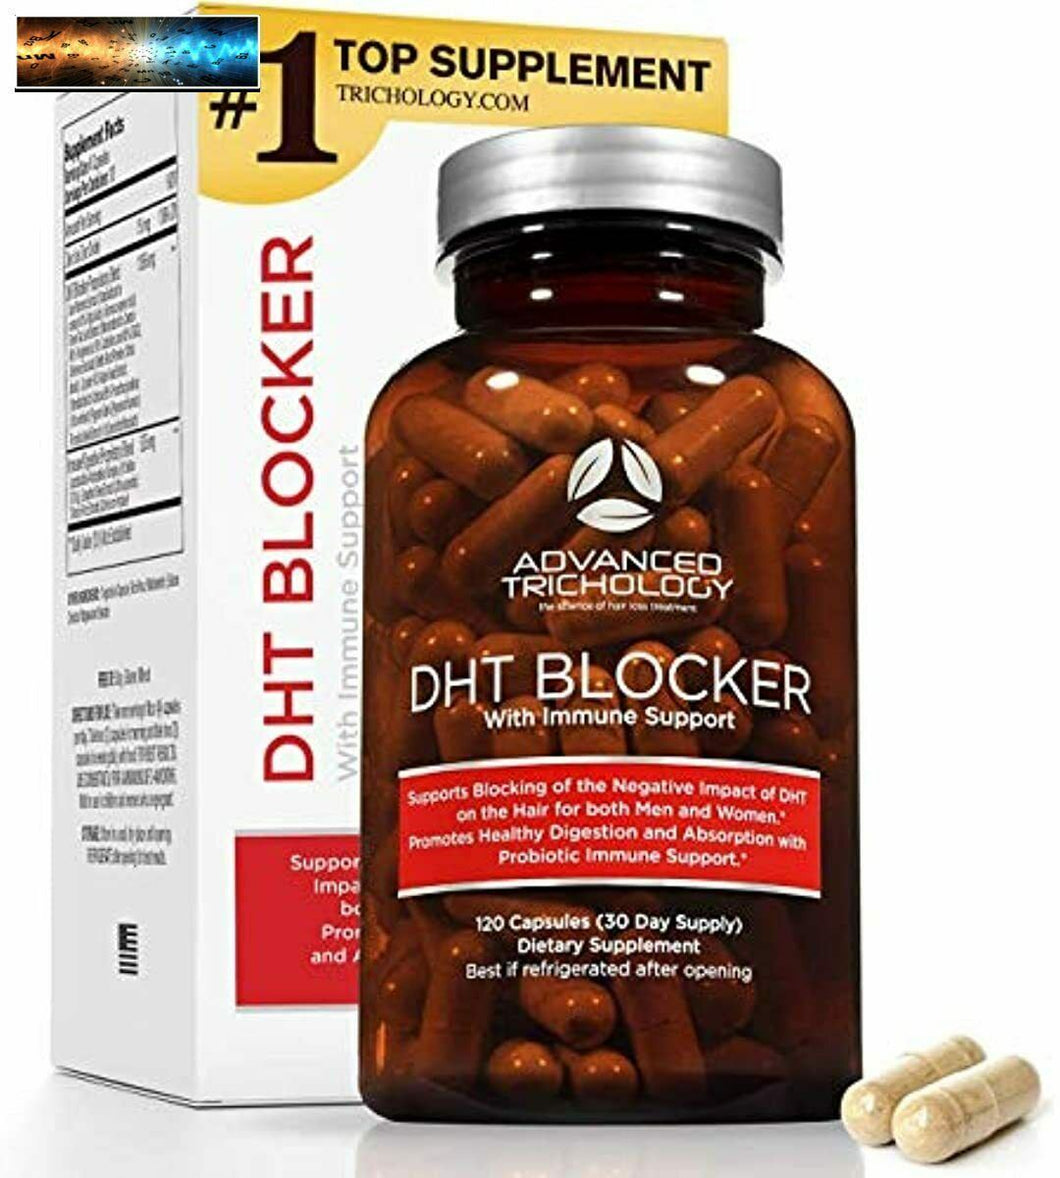 Advanced Trichology DHT Blocker with Immune Support - Hair Loss Supplements, Hig